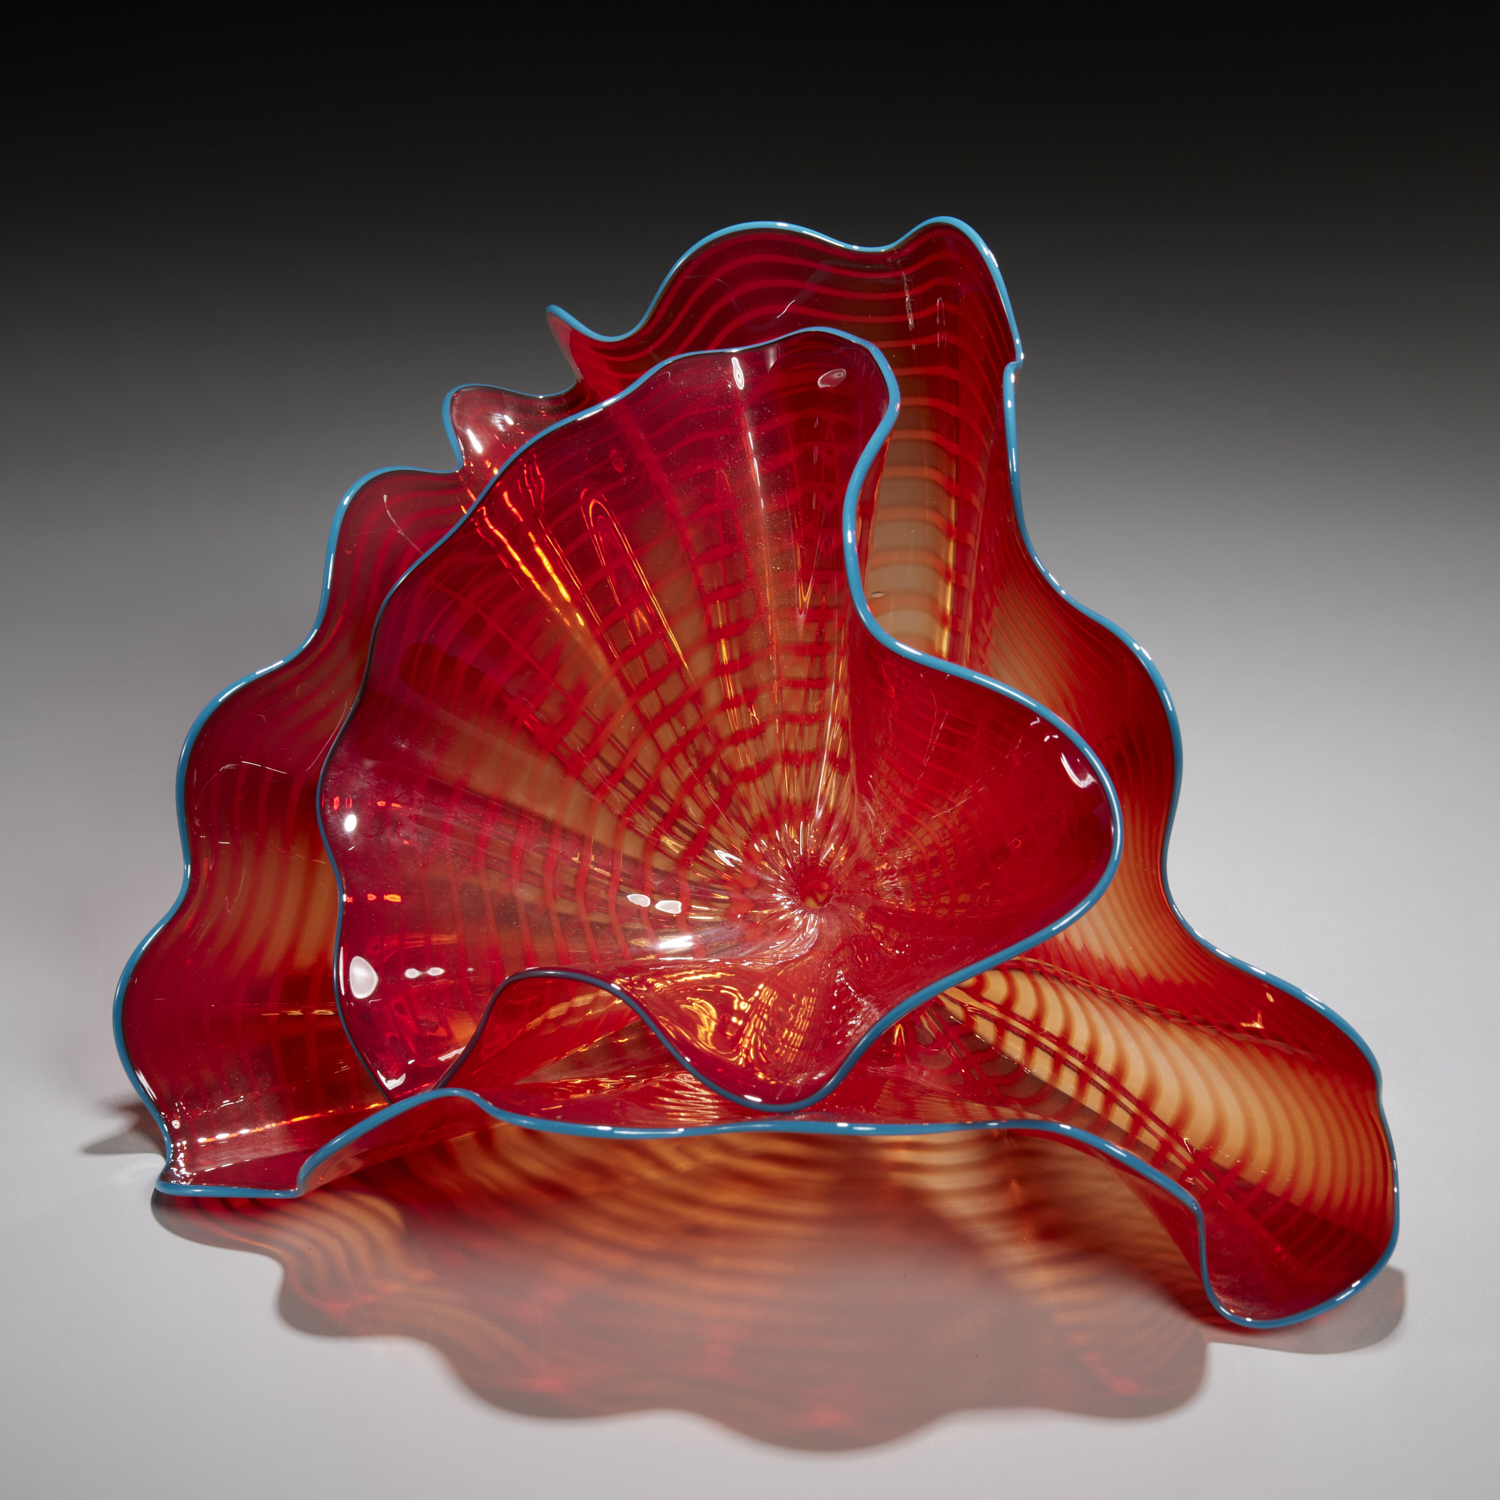 DALE CHIHULY 2 PIECE PERSIAN SET  29d2e4